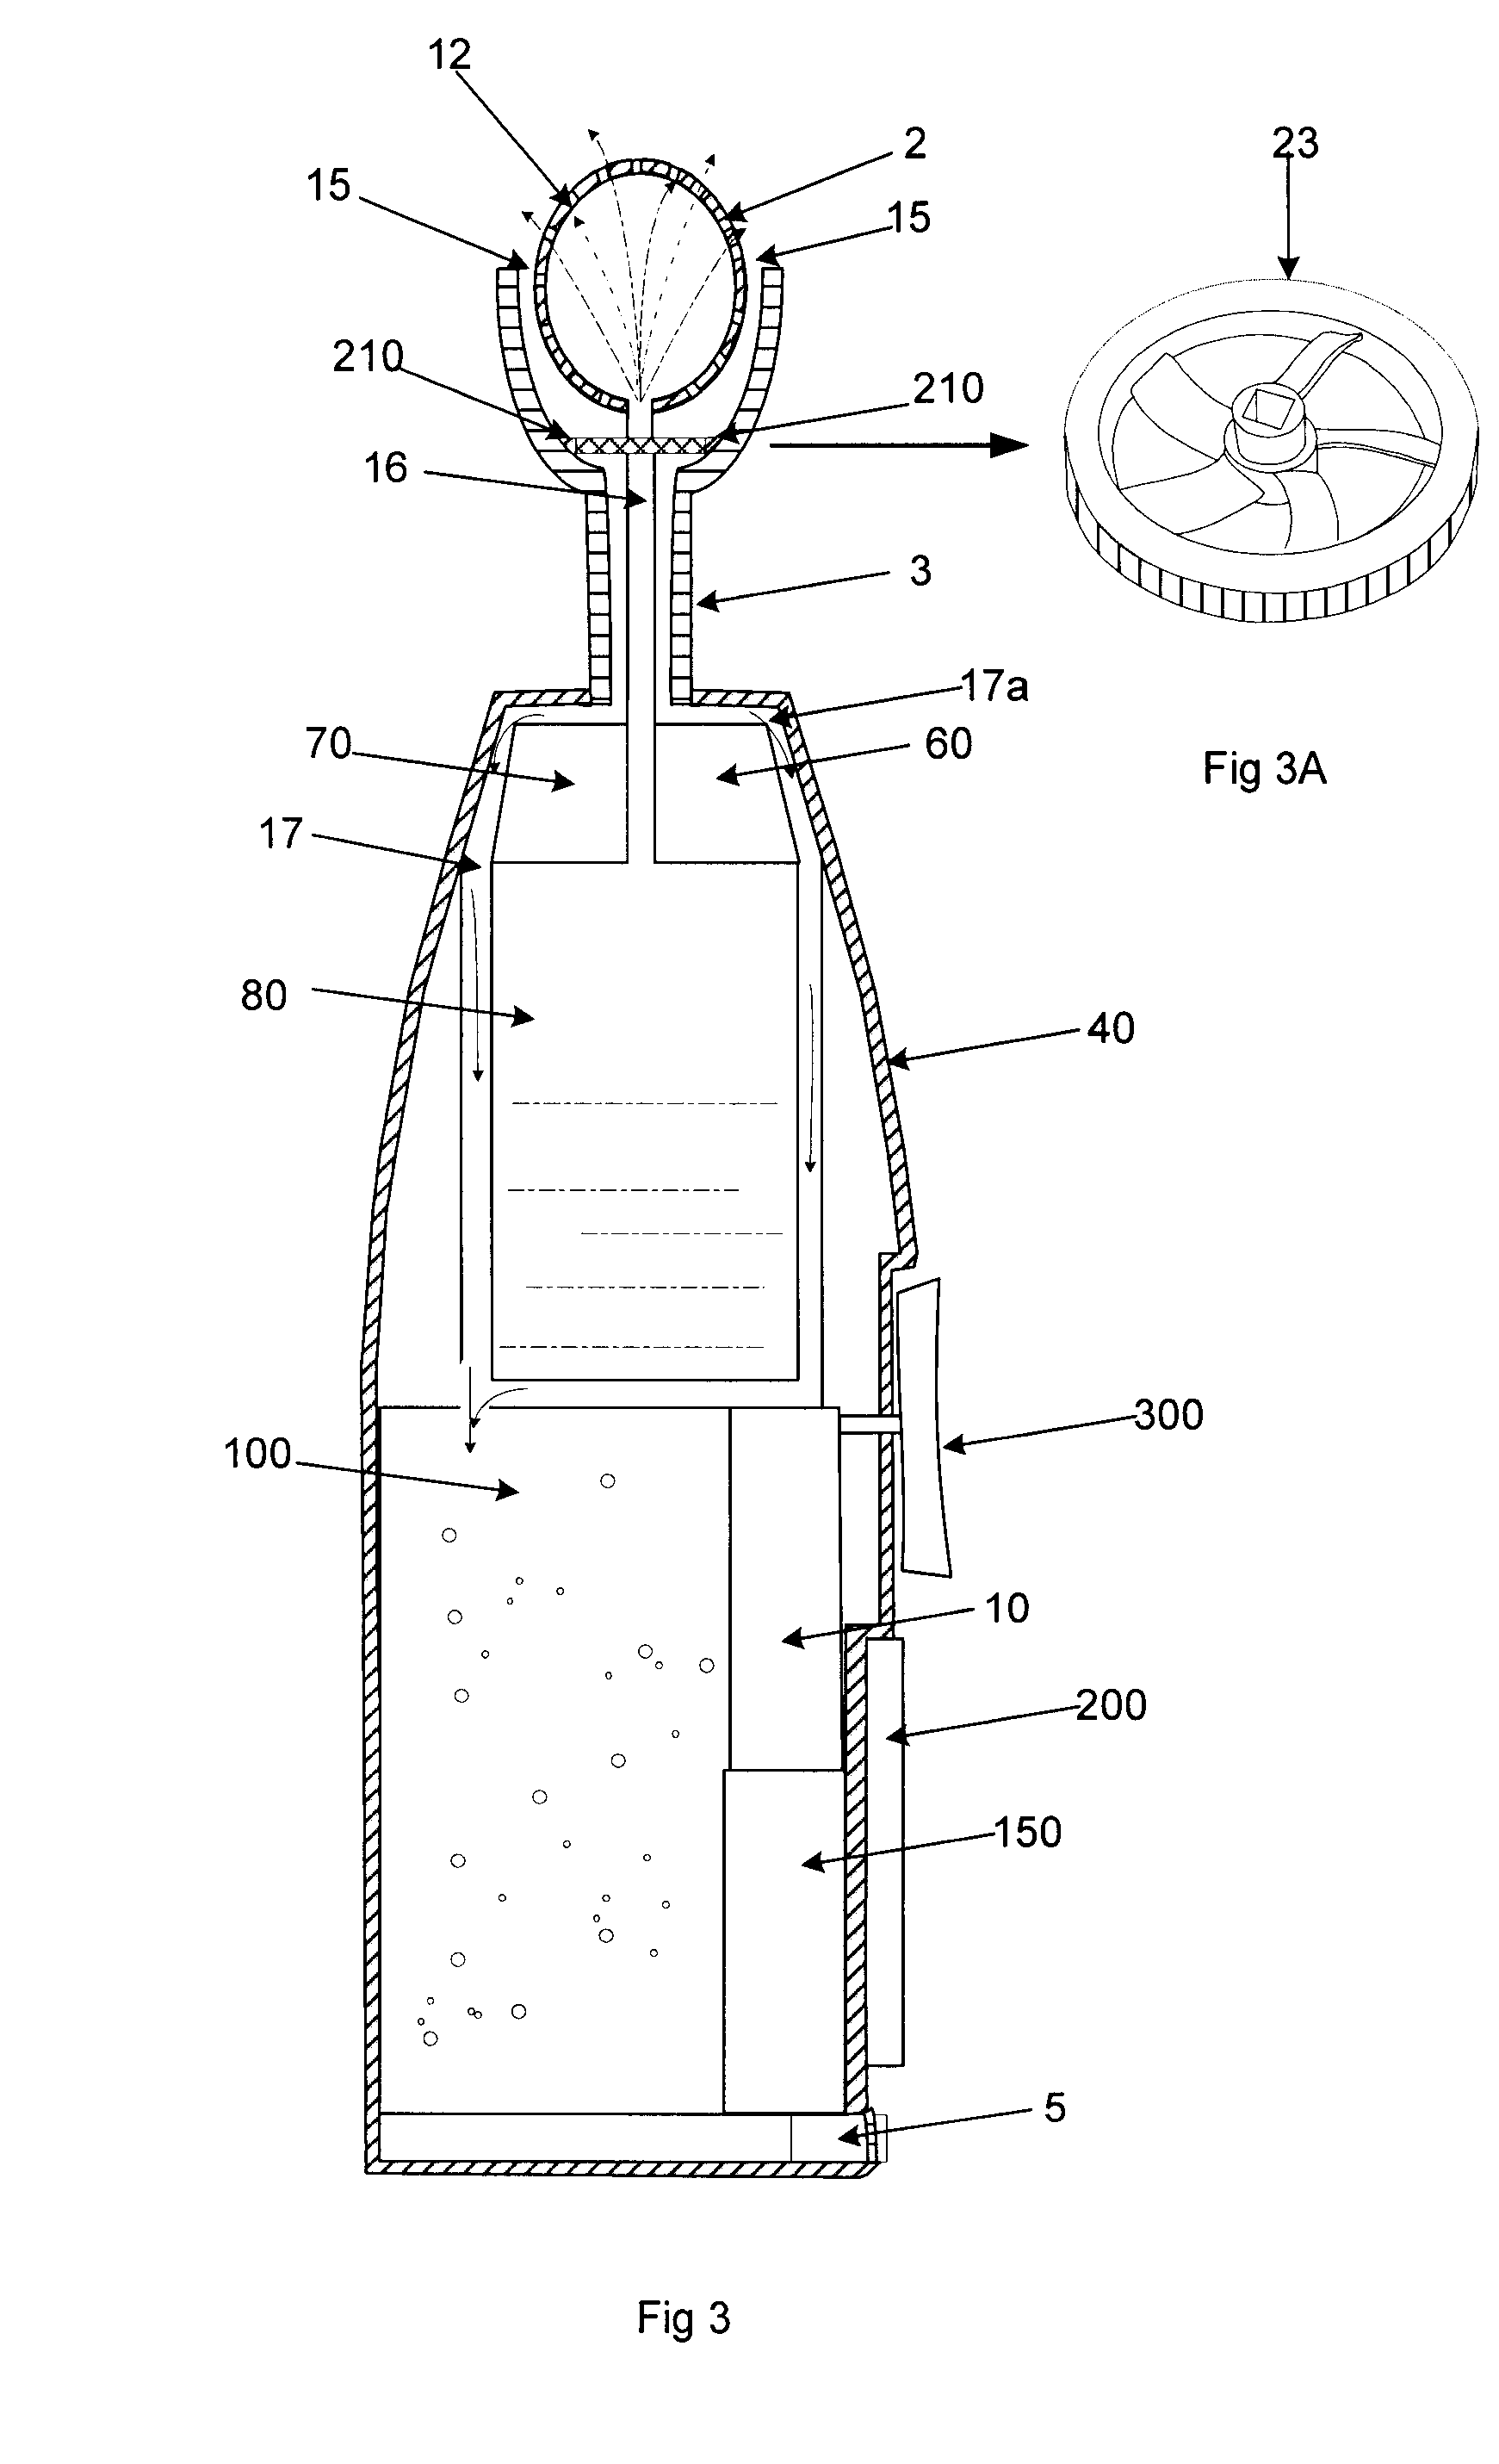 Device and method for cleaning nasal cavities